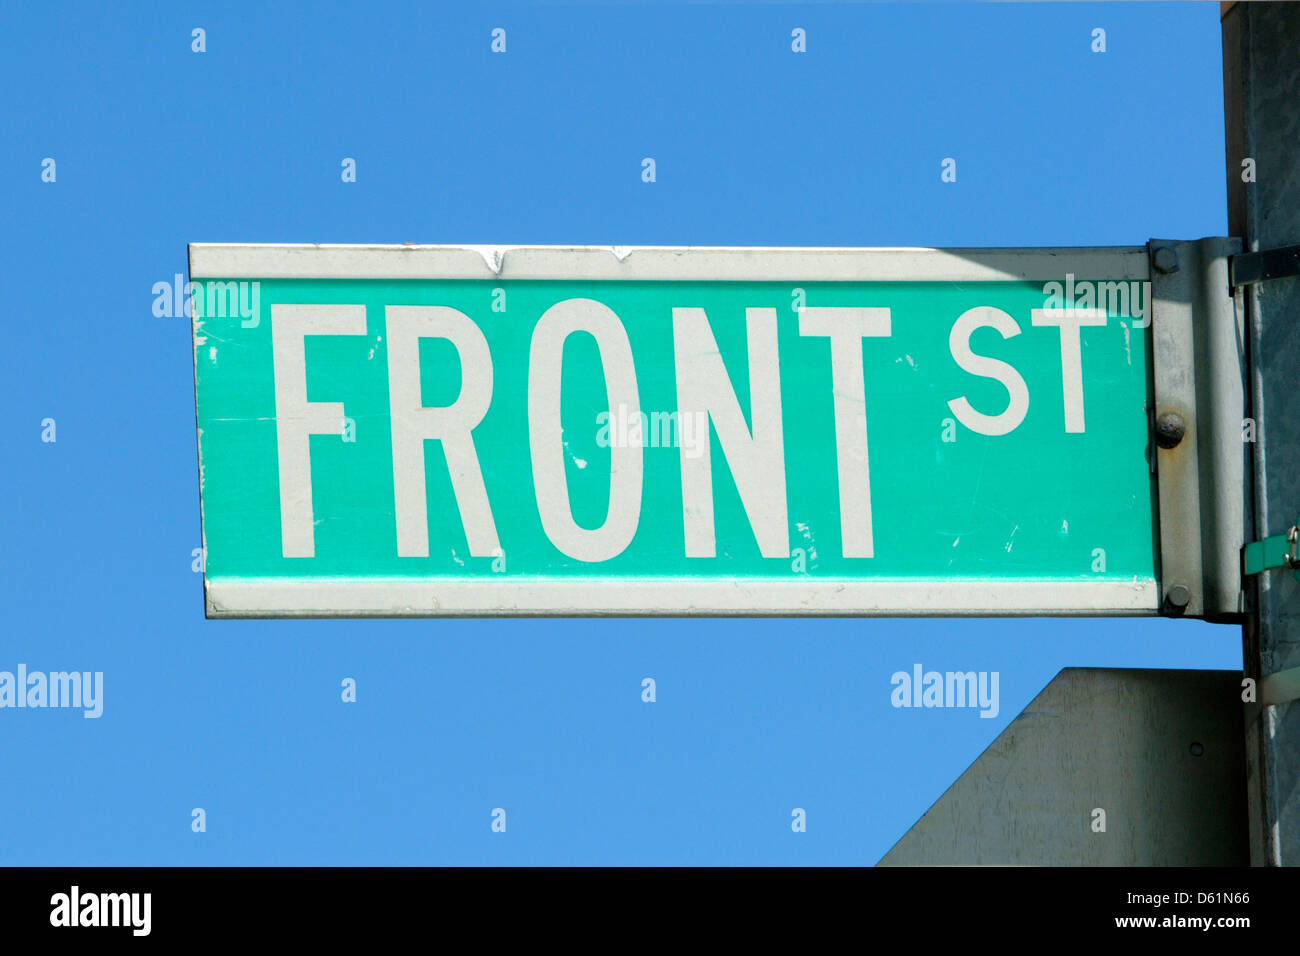 Front St., street sign in New York City, New York, USA, North America - Image taken from public ground Stock Photo